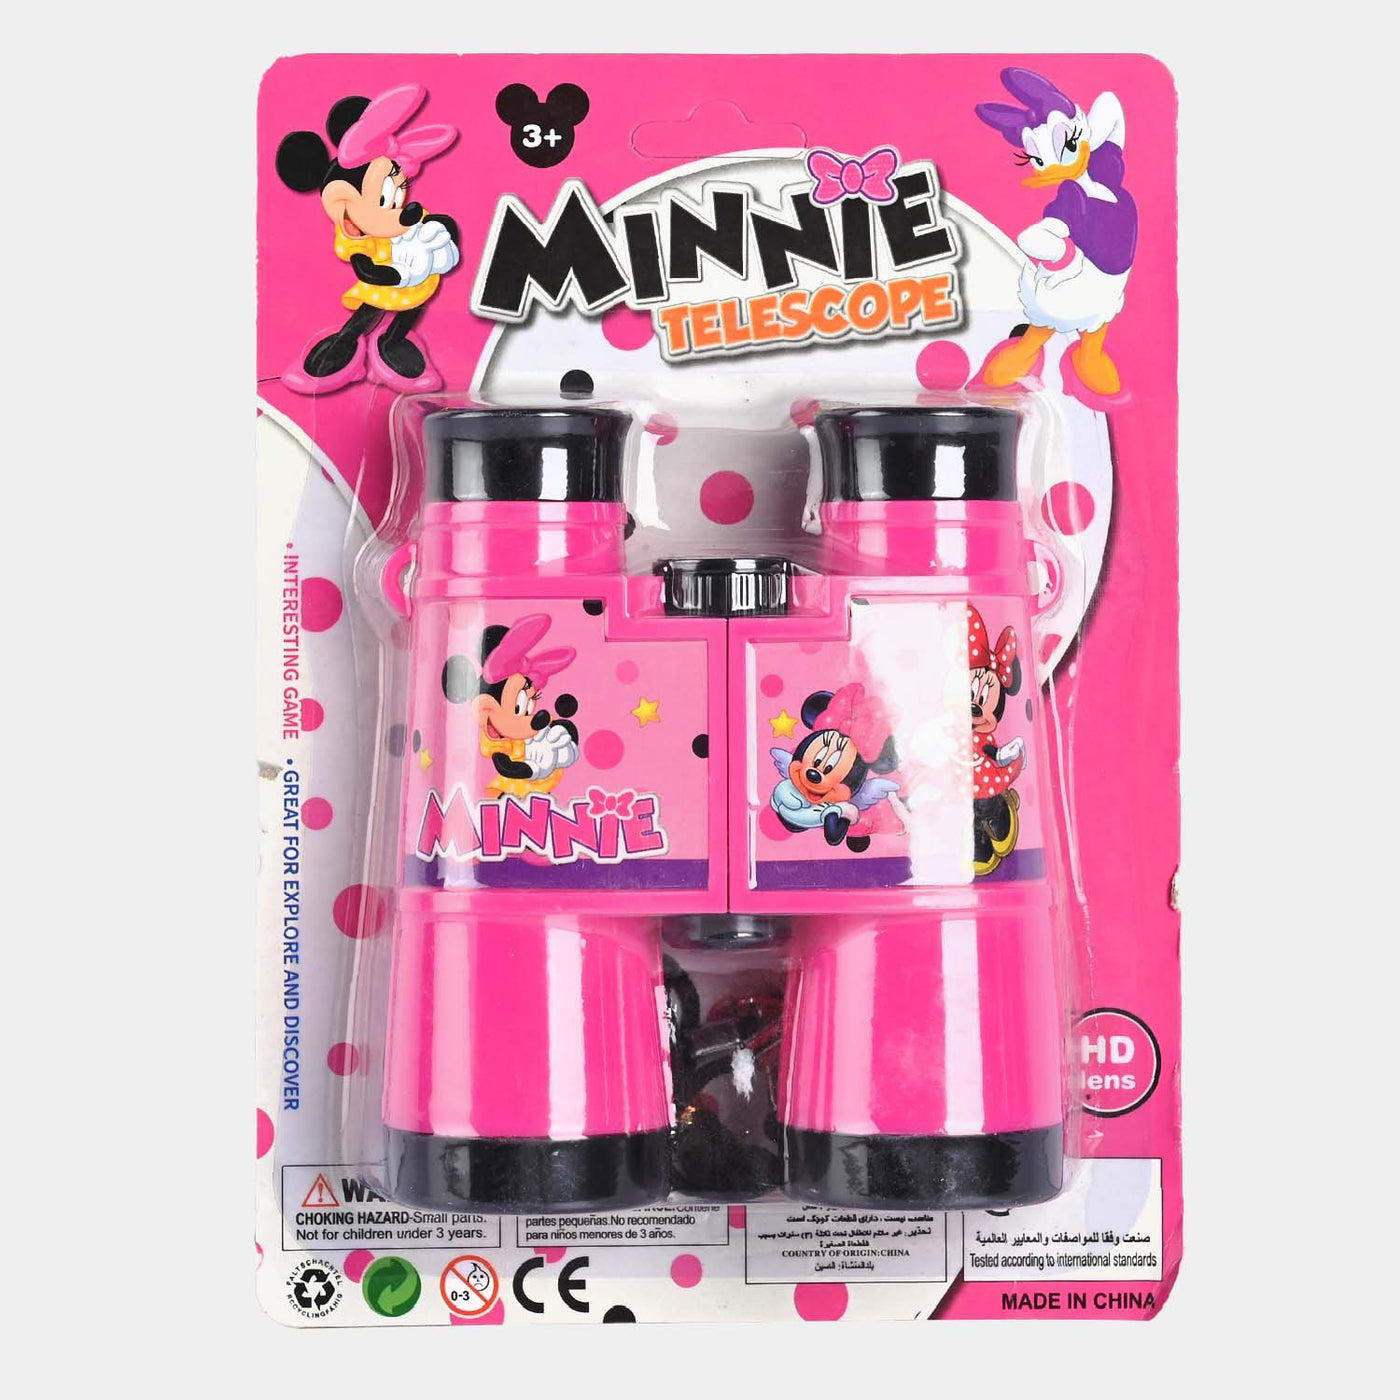 Minnie Telescope For Kids Perfect For Little Explorers